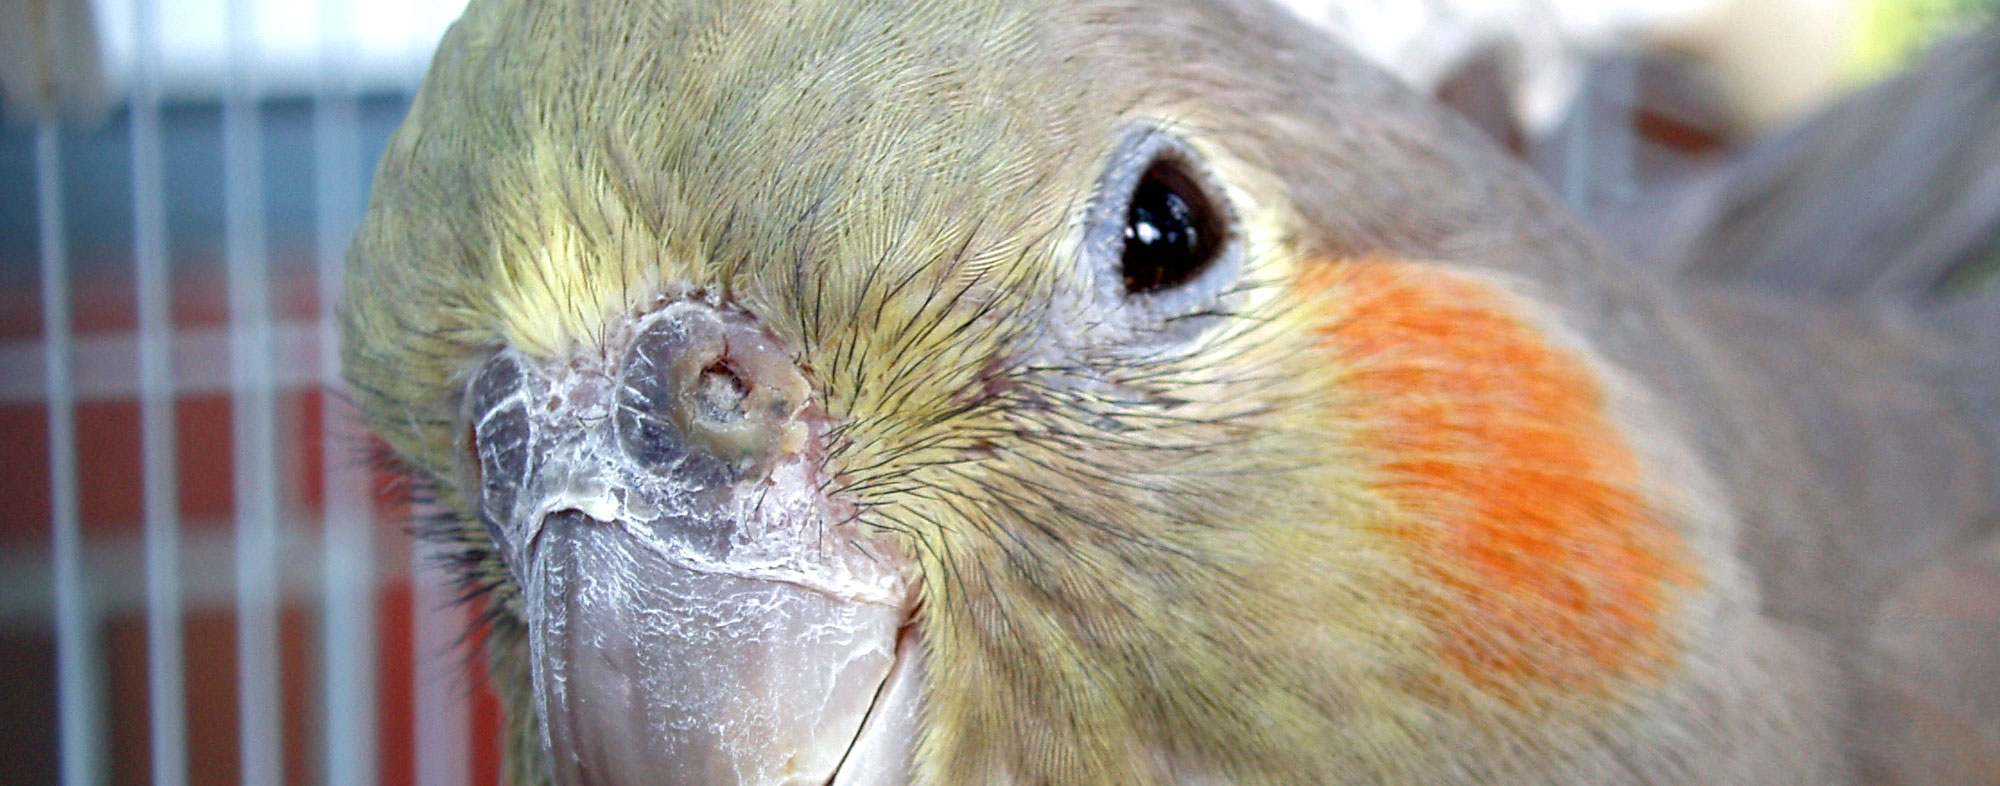 Pet parrot may start plucking its own feathers out of boredom